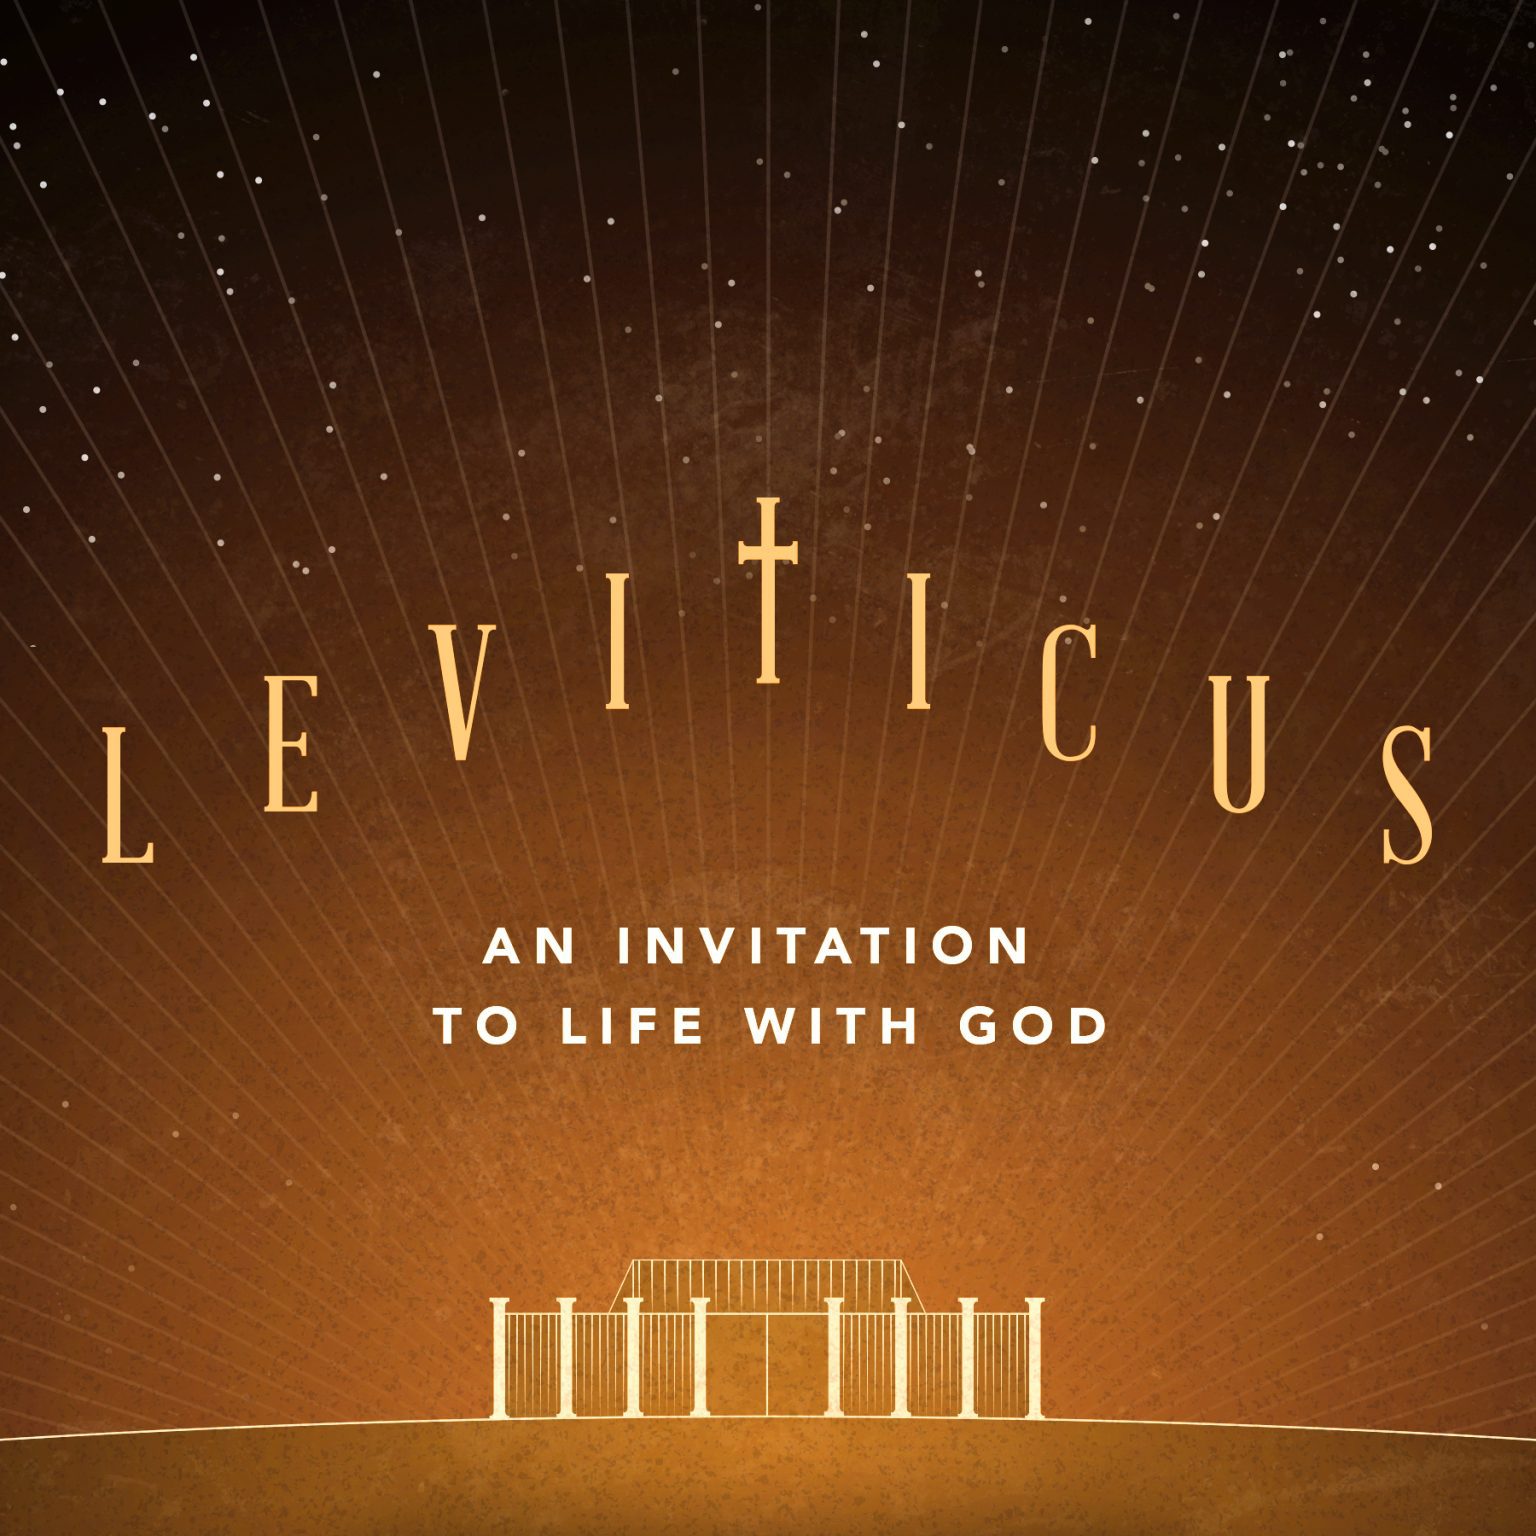 Leviticus: An Invitation to Life with God